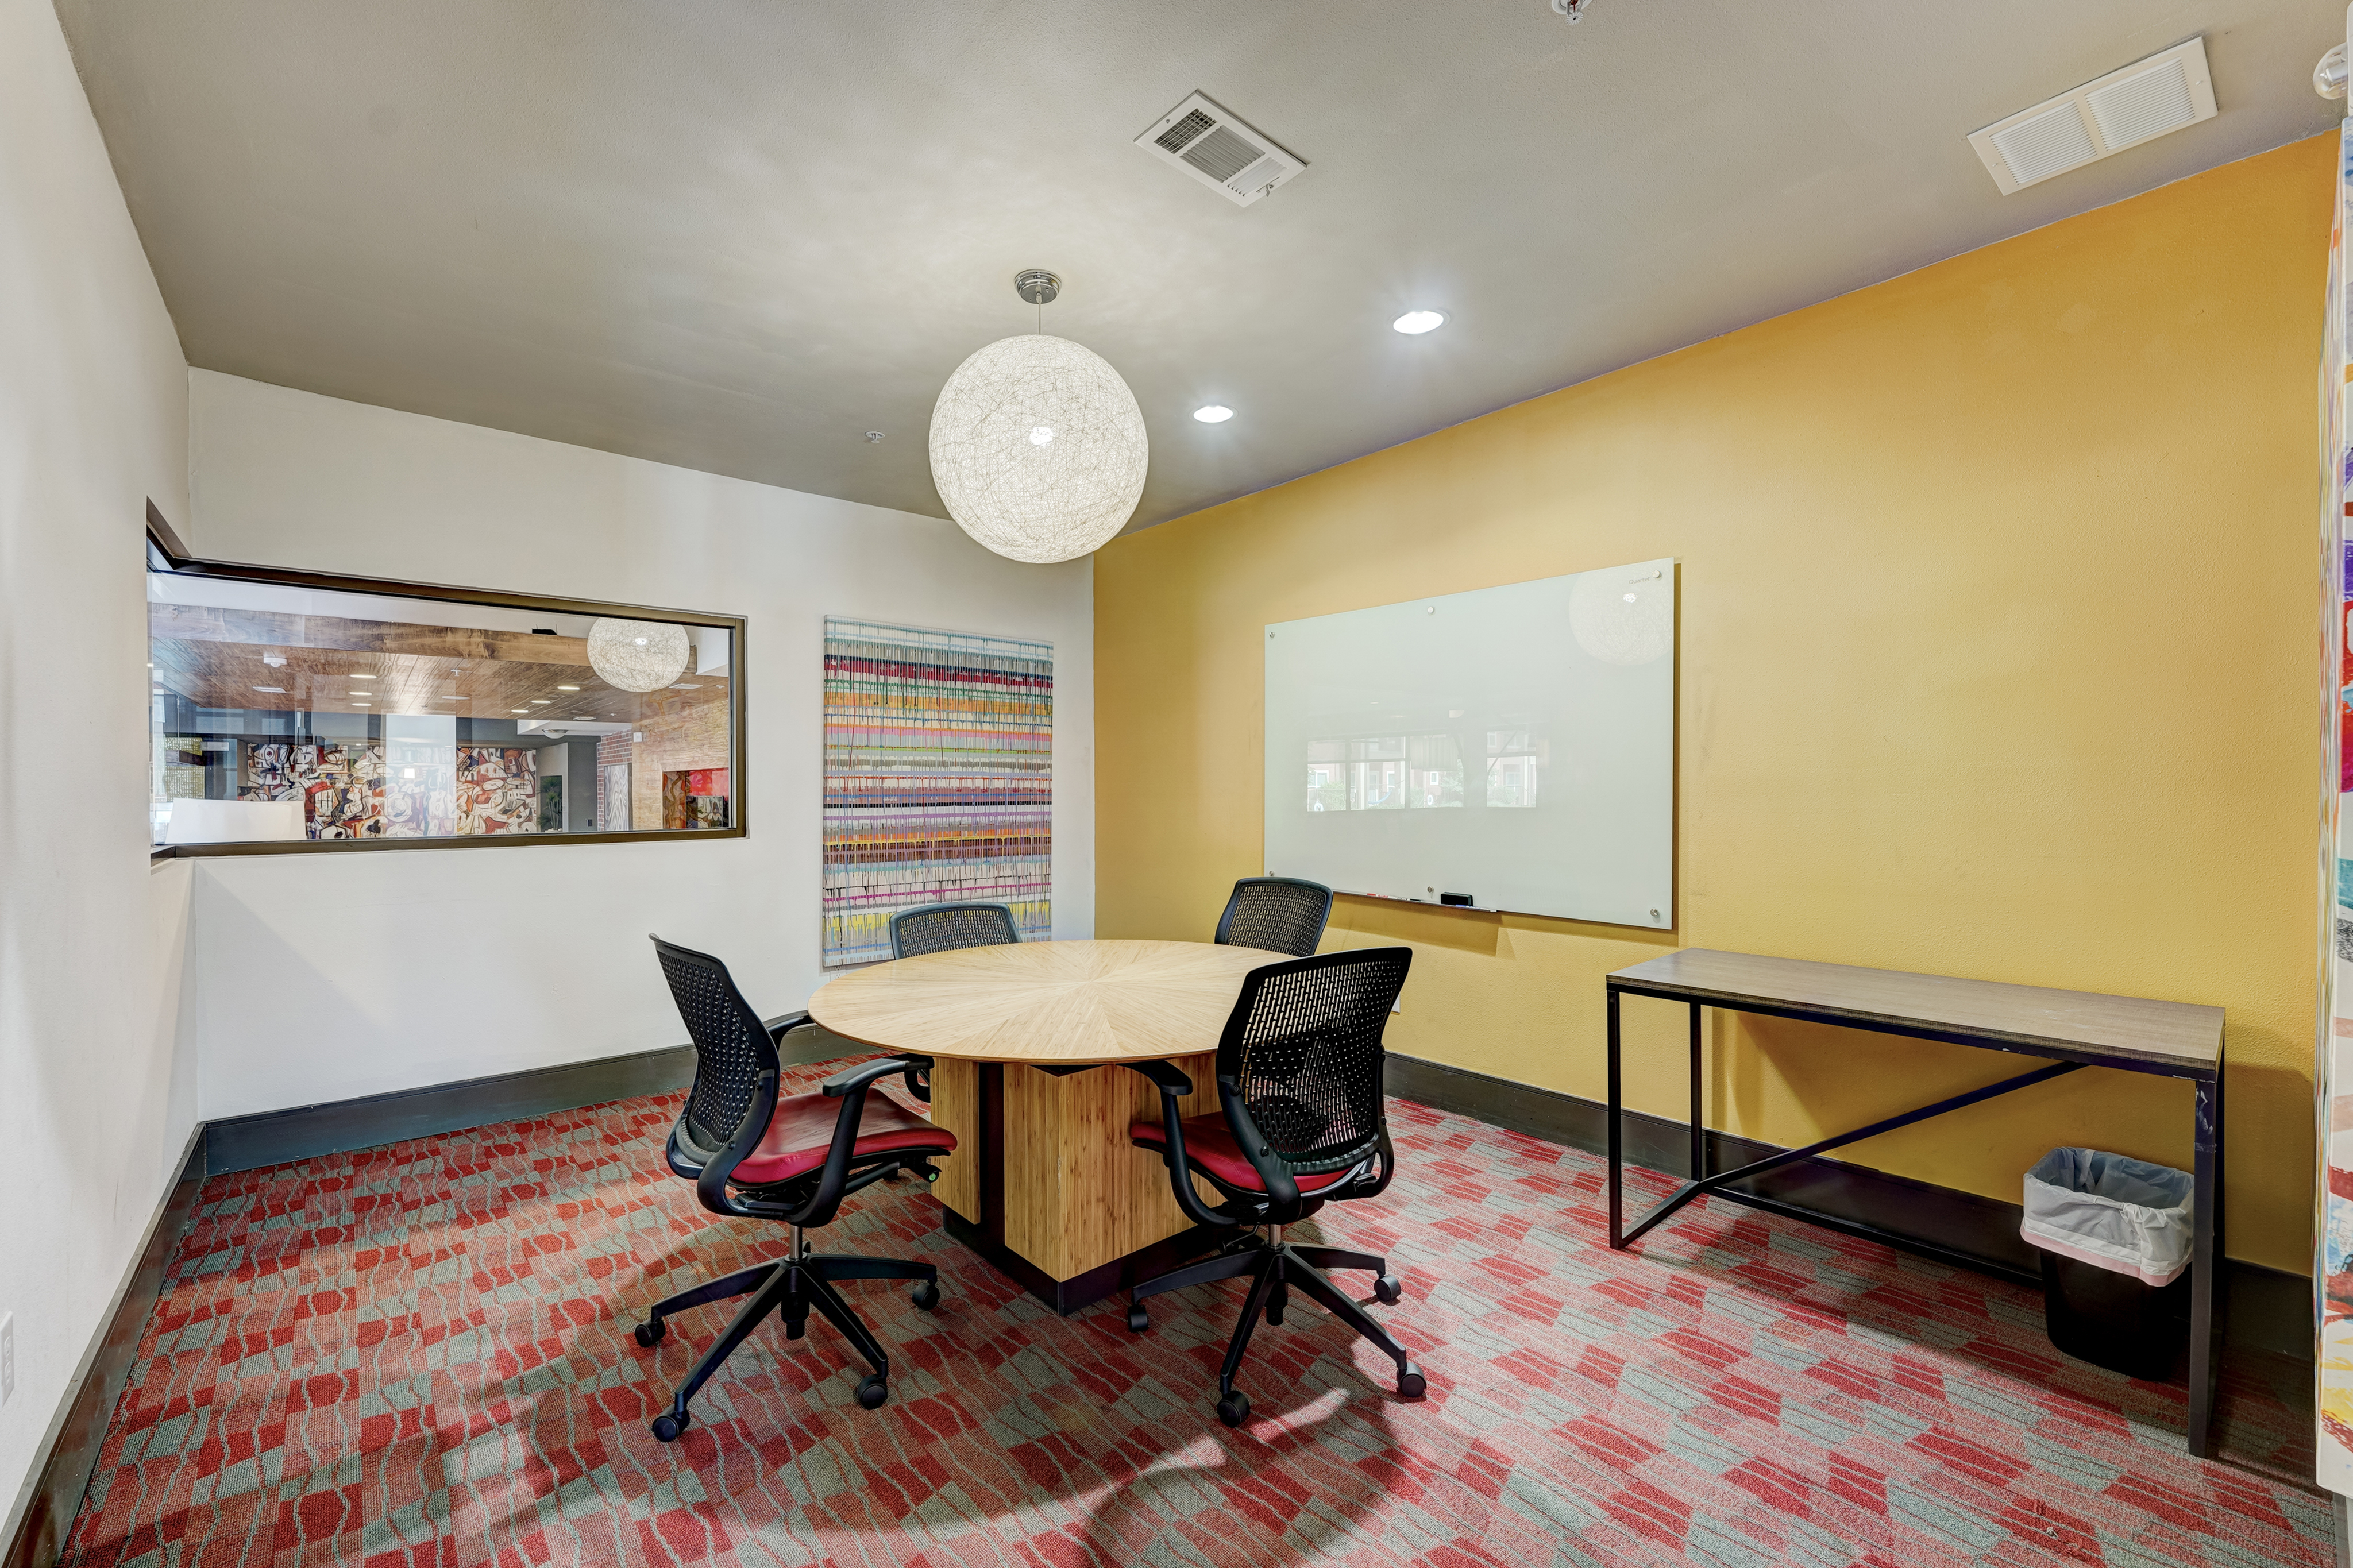 Image of Private Study Rooms for Millennium